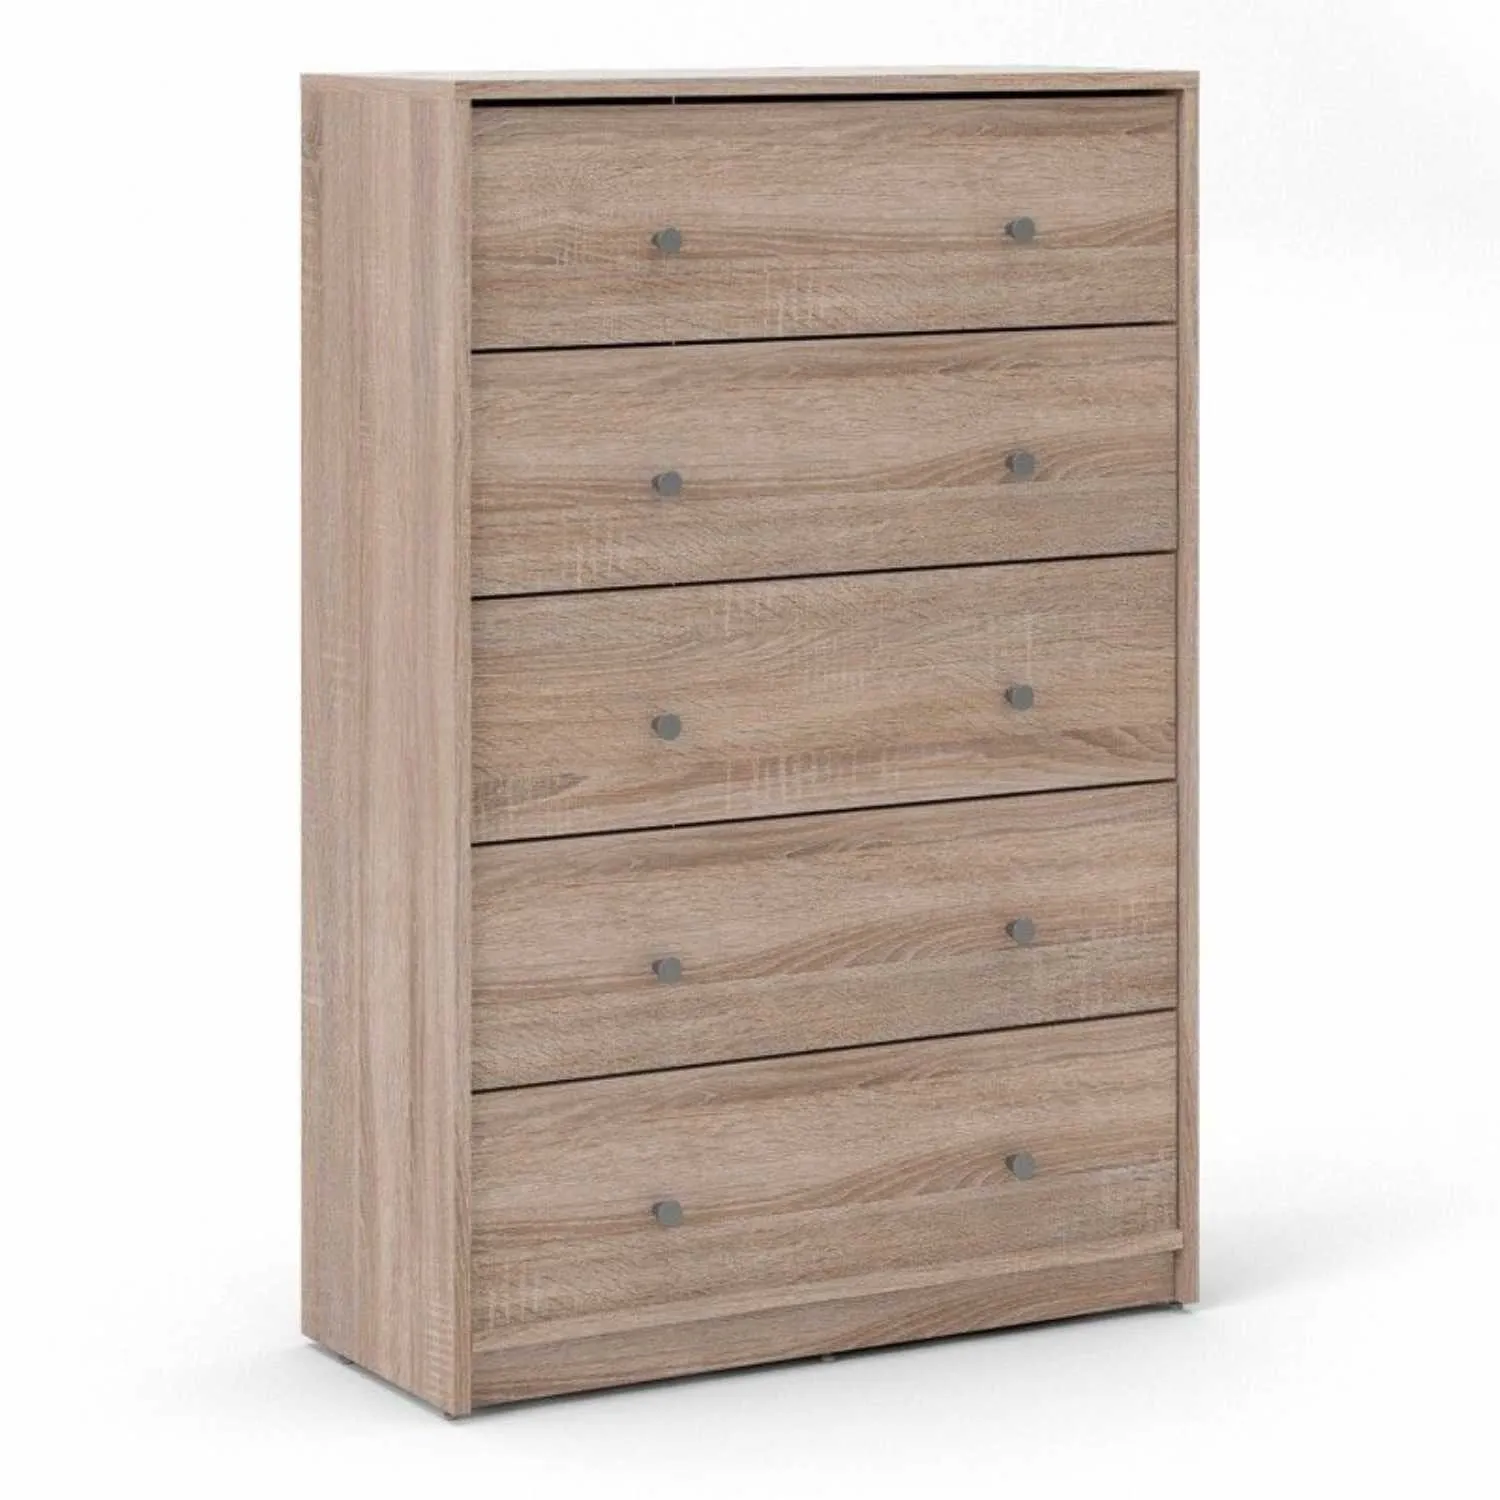 Chest of 5 Drawers in Truffle Oak